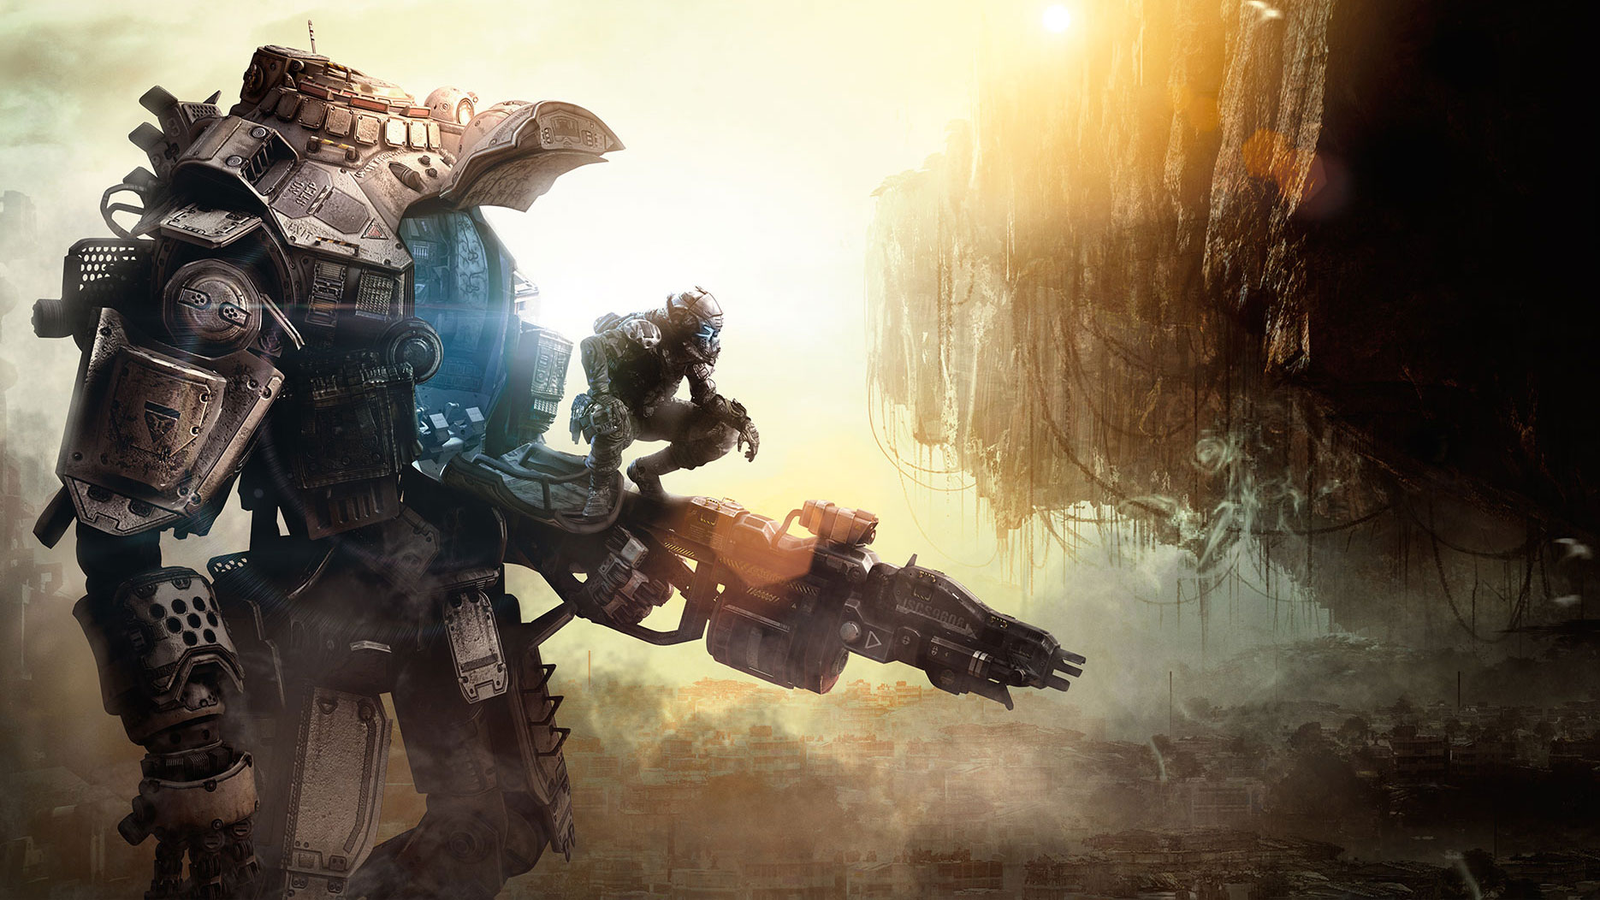 Titanfall2 is set to launch about a month from now on October 28! : r/ titanfall